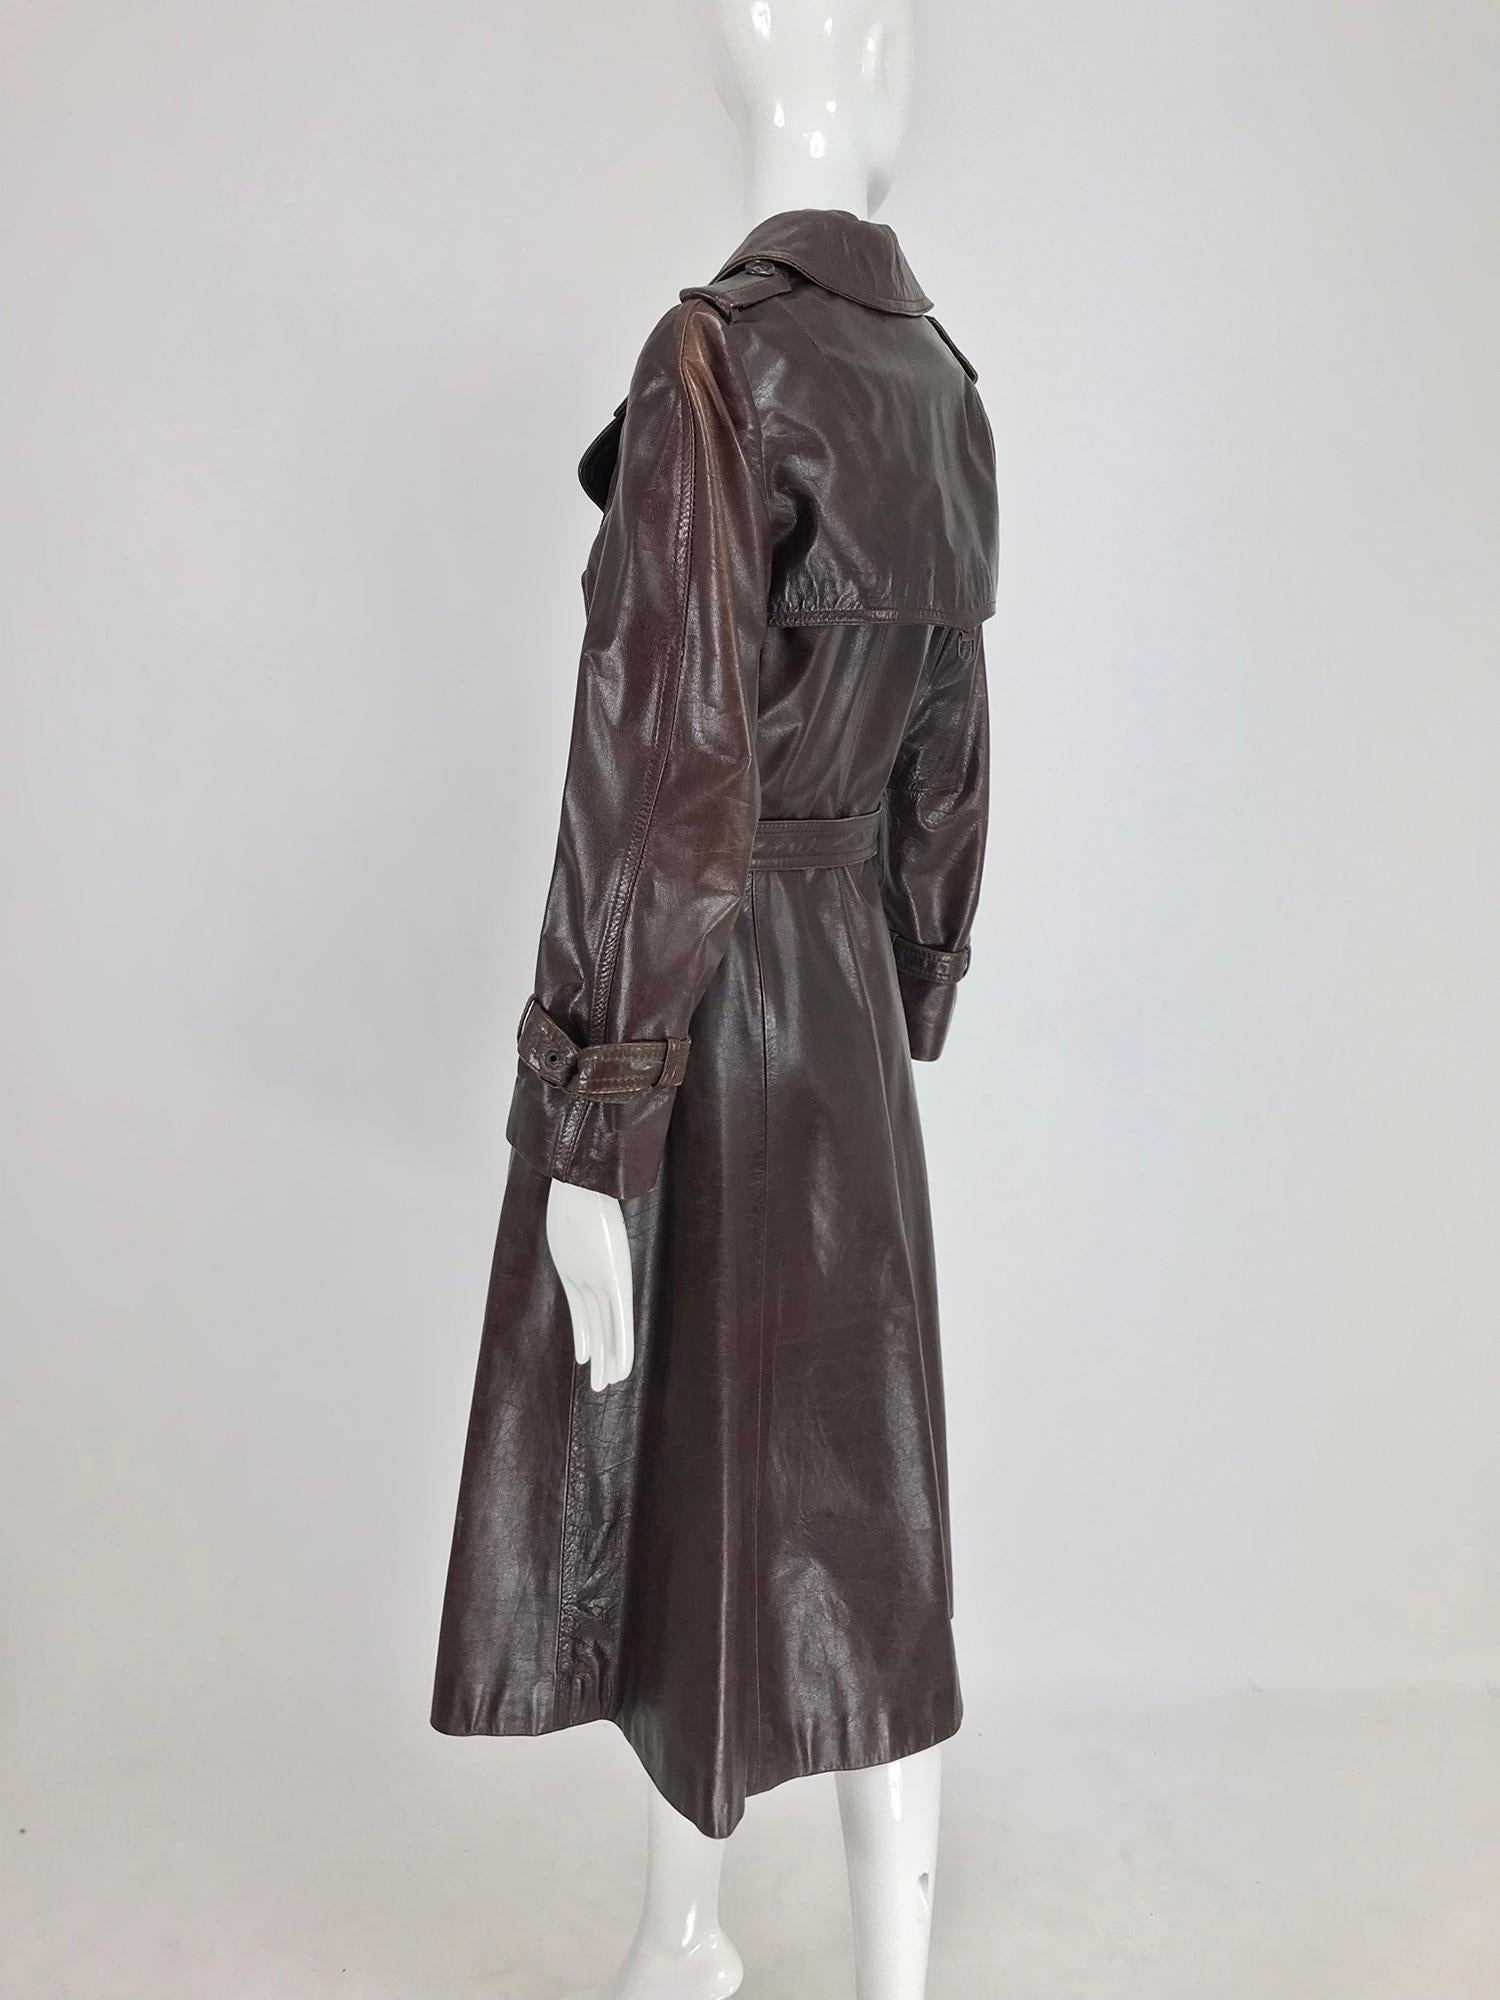 Black Anne Klein Chocolate brown leather trench coat 1970s